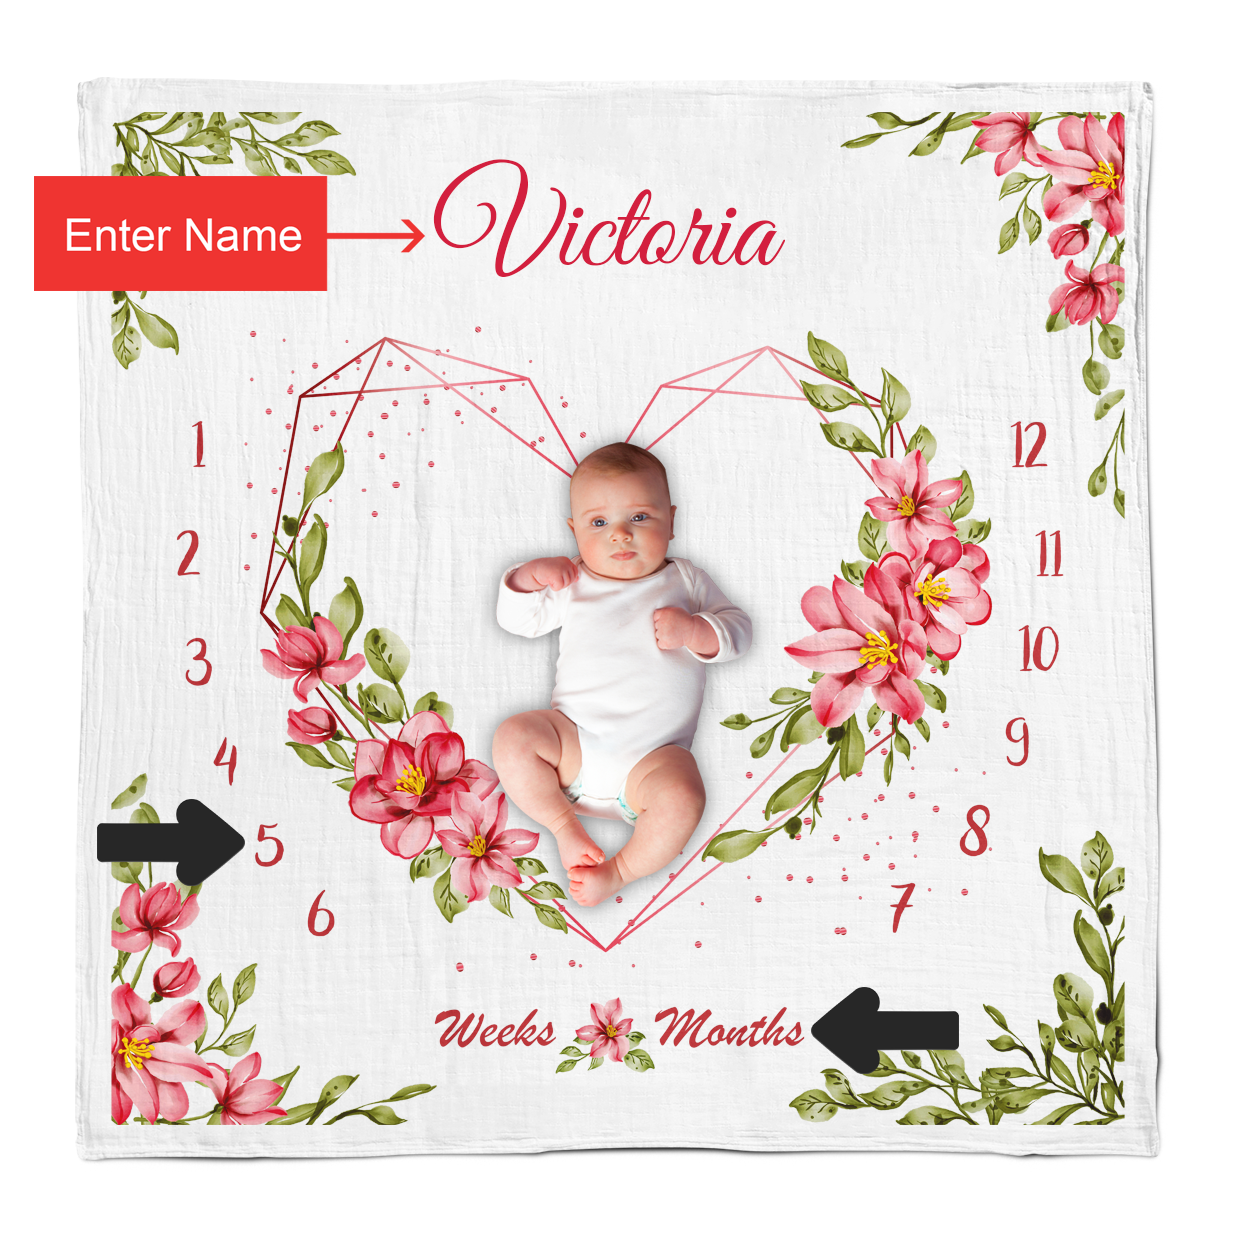 Personalized Endanzoo Baby Monthly Milestone Muslin Swaddle Blanket - Pink Floral